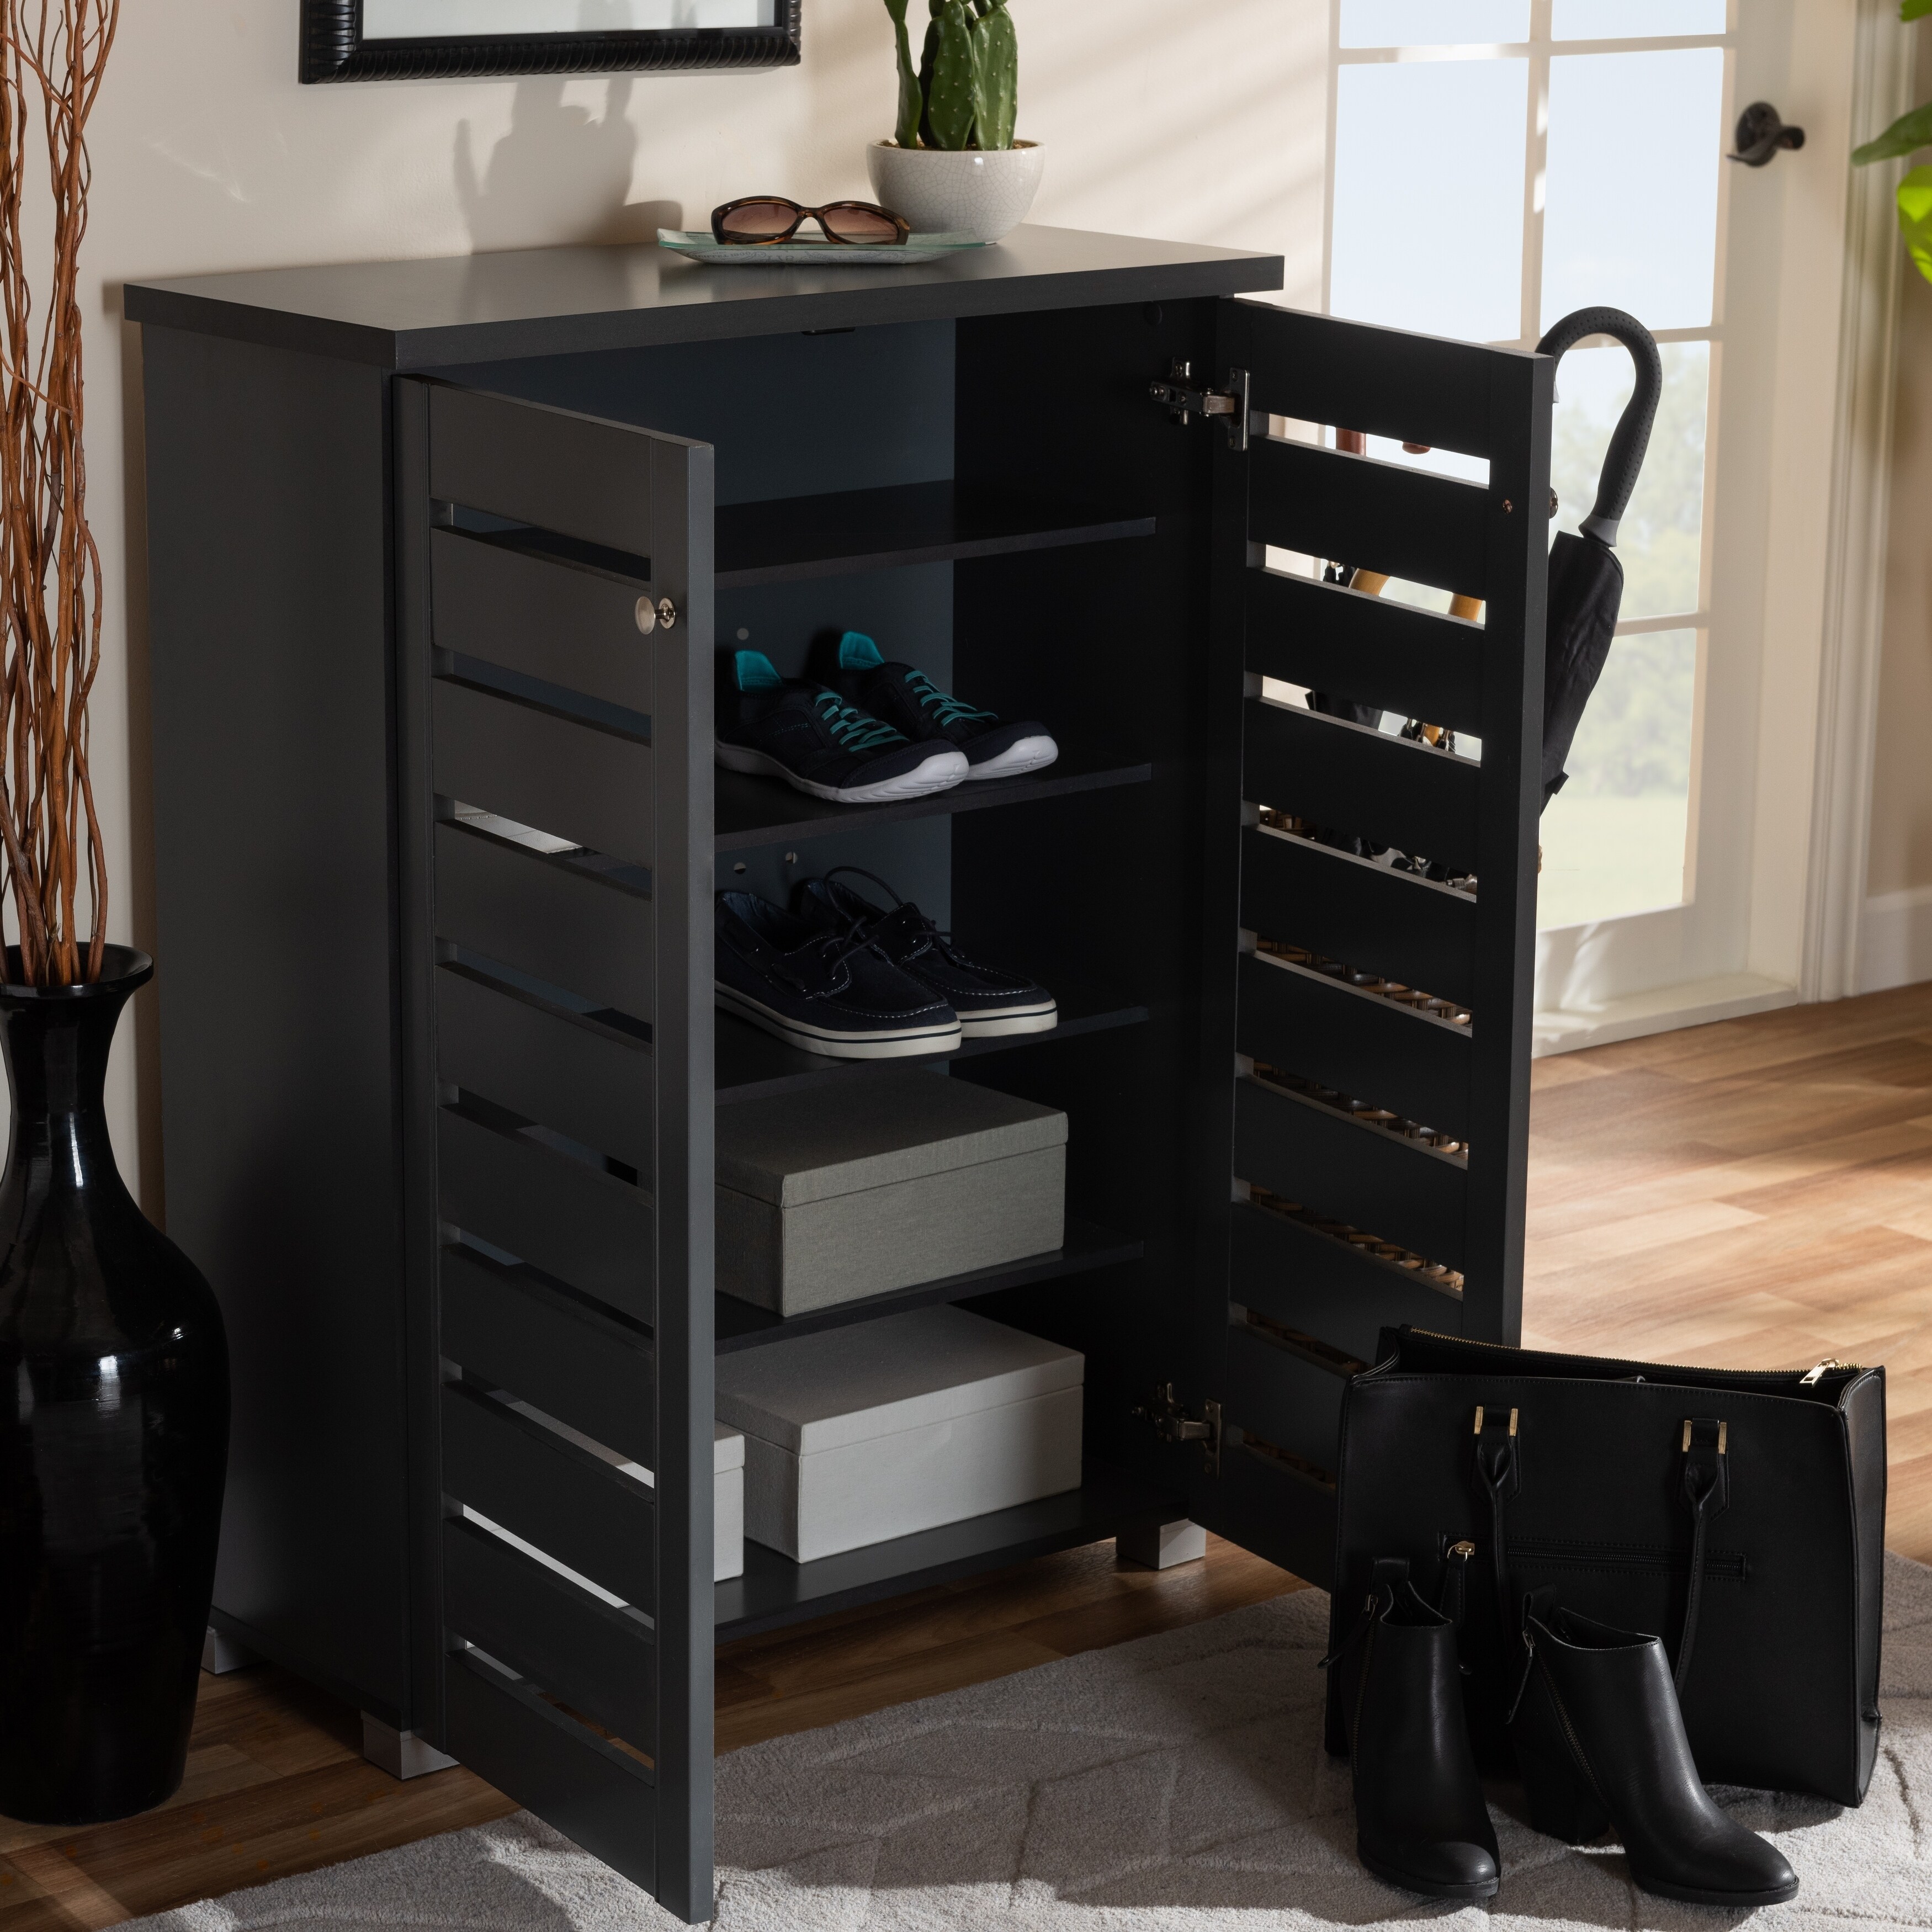 https://ak1.ostkcdn.com/images/products/26396247/Contemporary-Shoe-Storage-Cabinet-58f9d1b8-5899-4364-be80-a2957d05203c.jpg